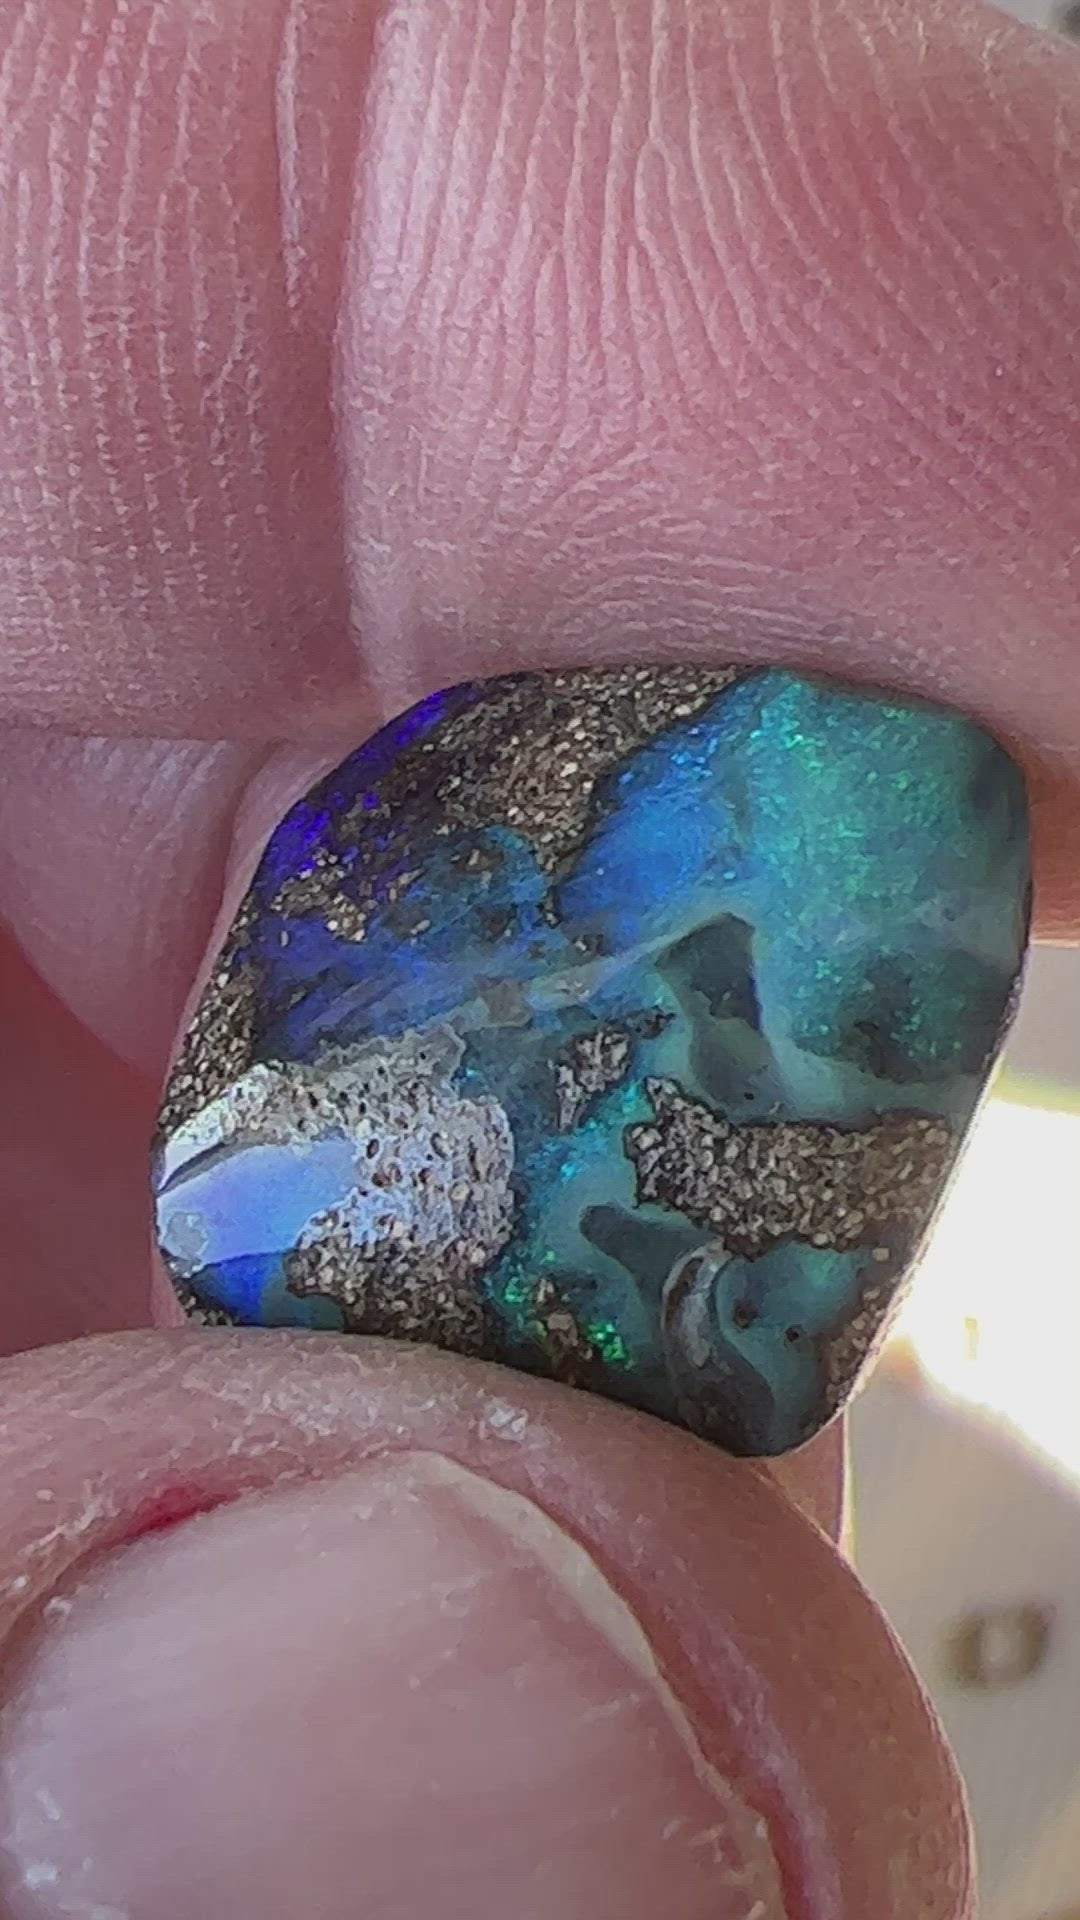 Beautiful greens and blues are displayed in this nice piece of Queensland boulder opal.